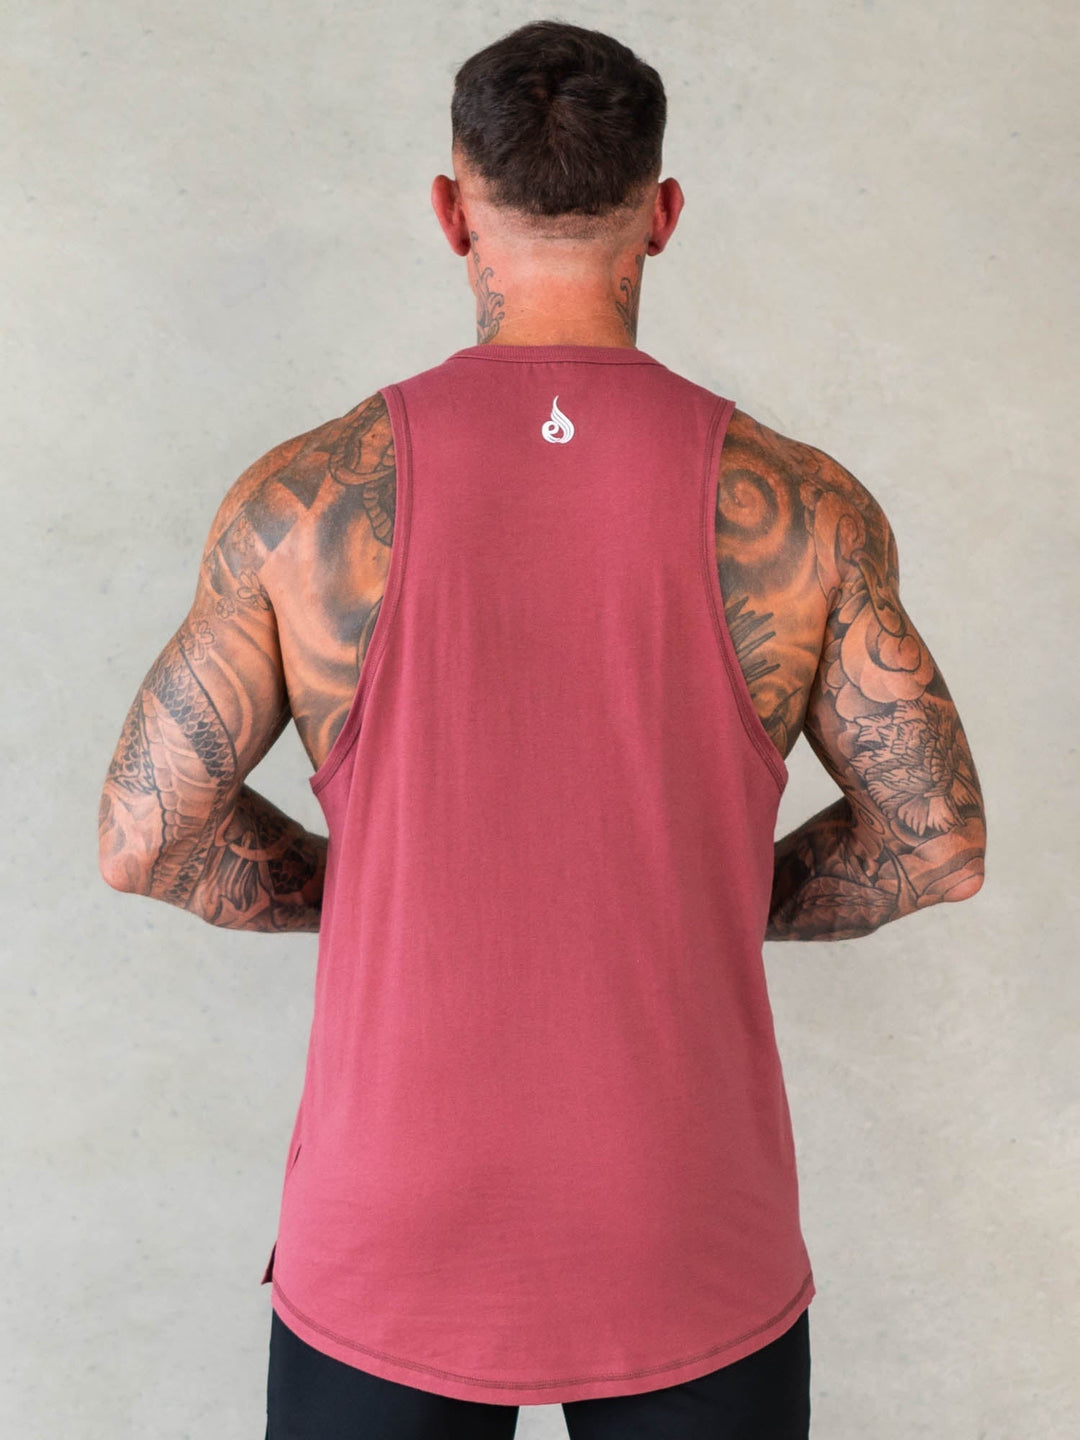 Octane Tank - Red Oxide Clothing Ryderwear 